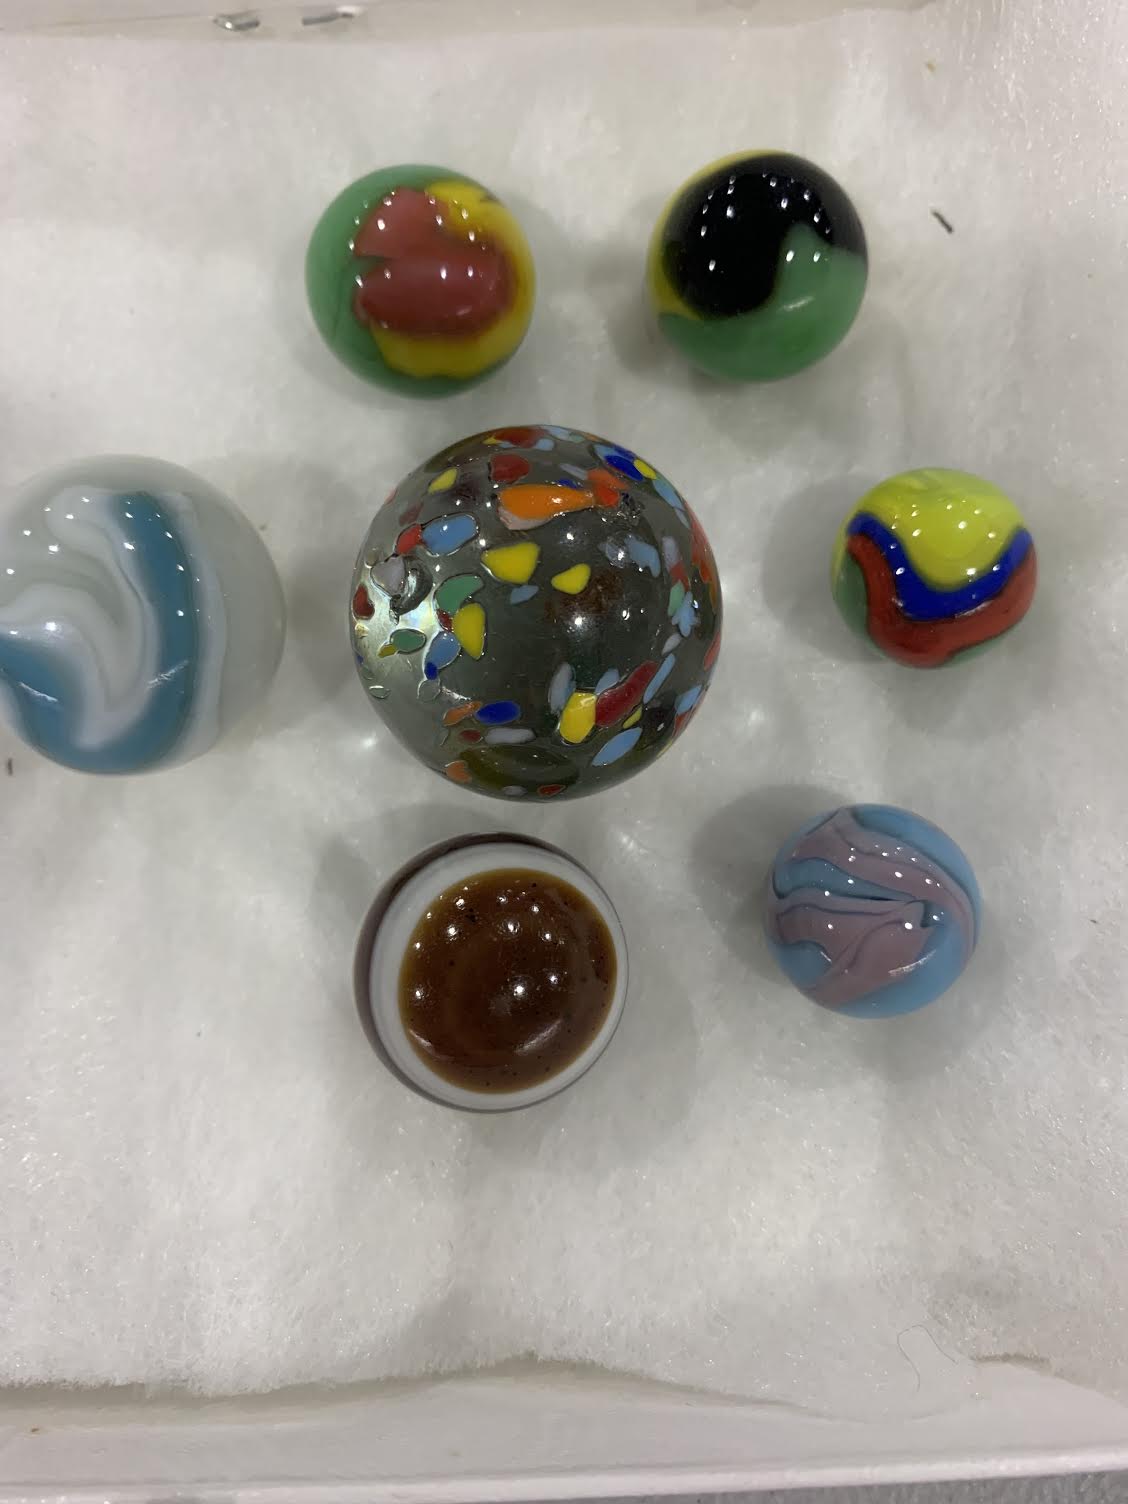 Collection of her favorite marbles